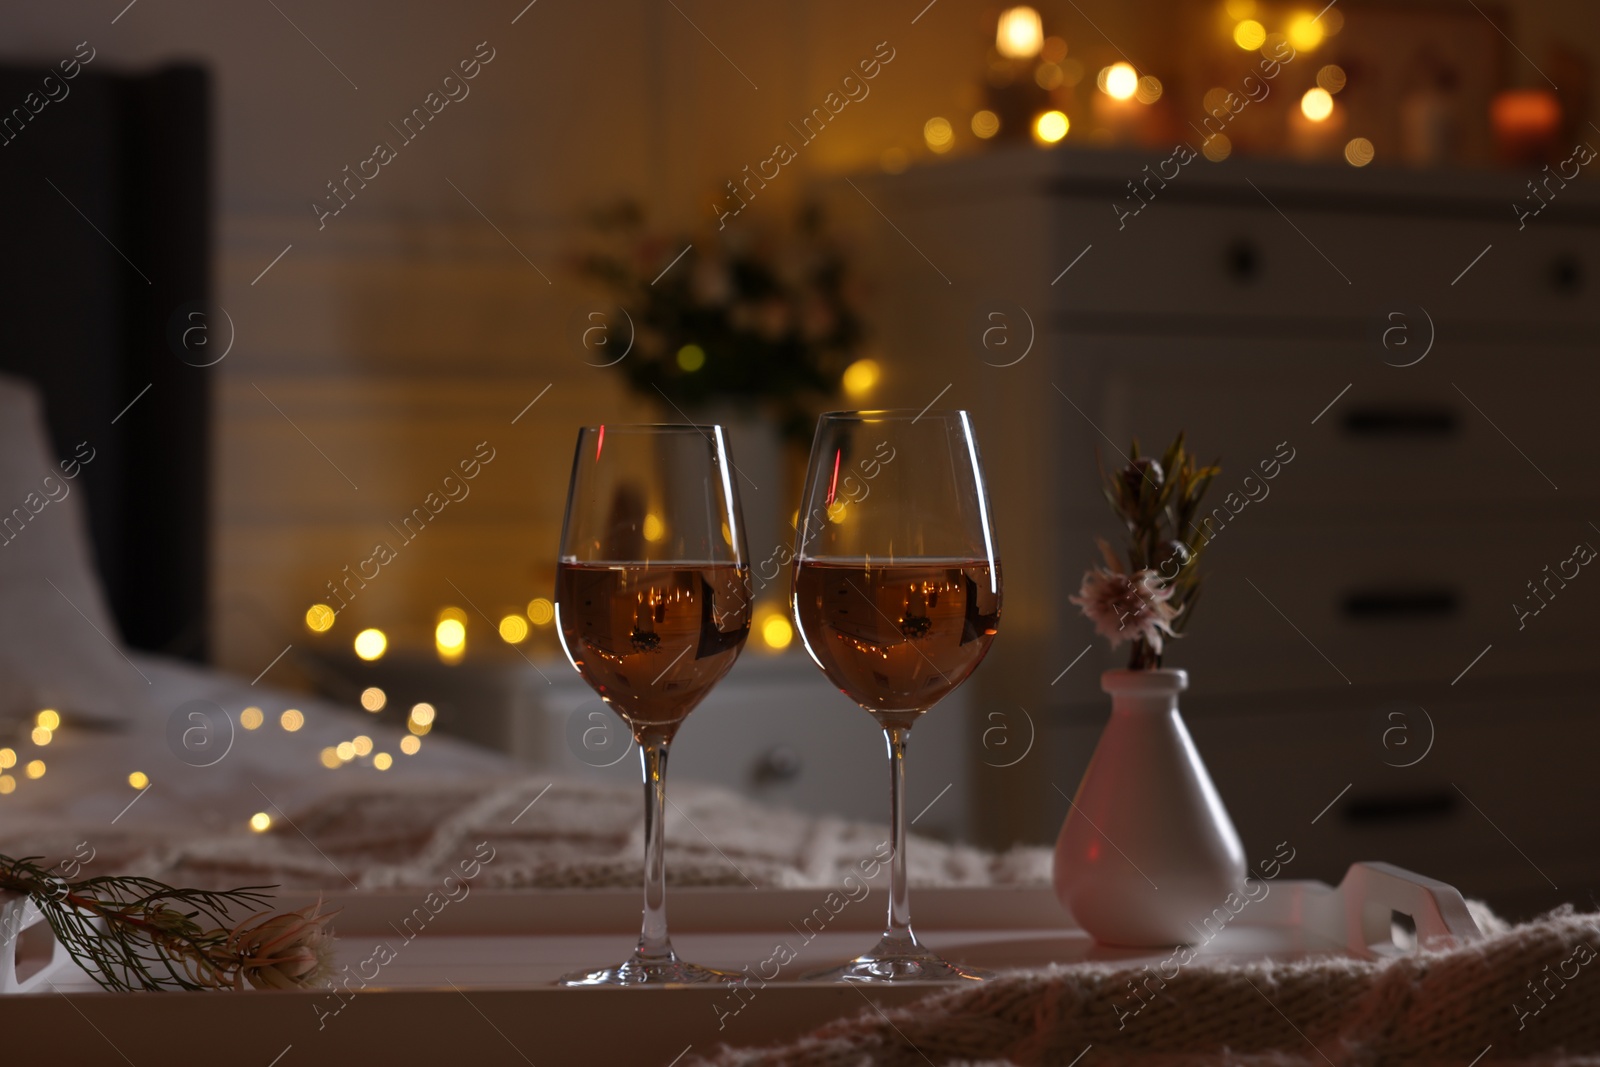 Photo of Glasses of wine in bedroom adorned for romantic evening